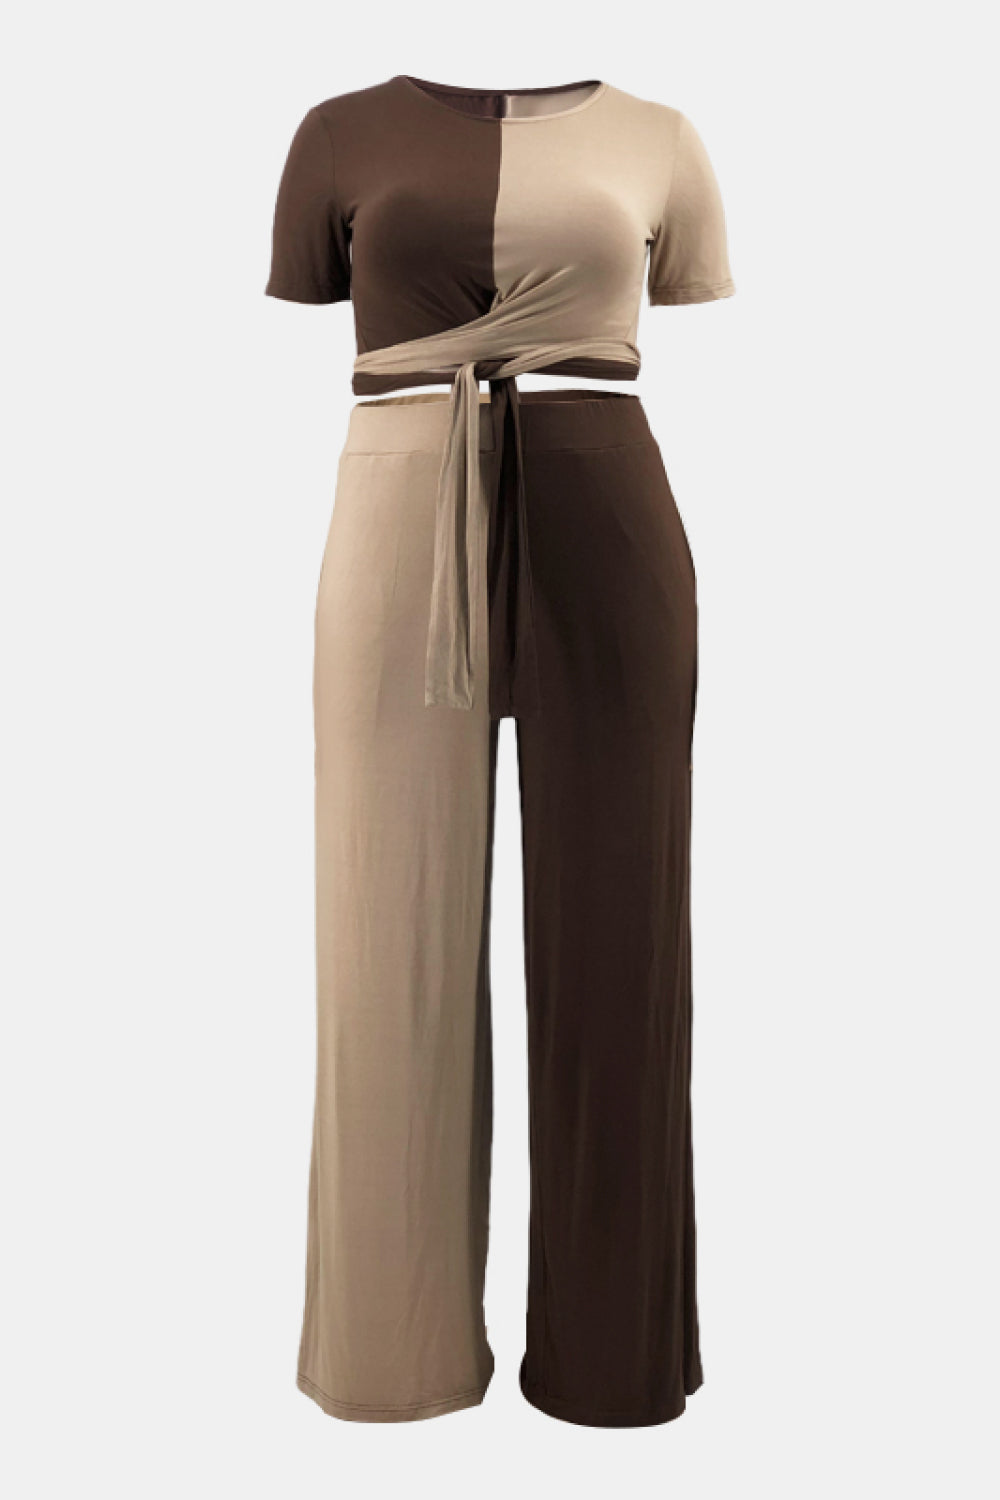 Plus Size Two-Tone Tie Front Top and Pants Set with Pockets